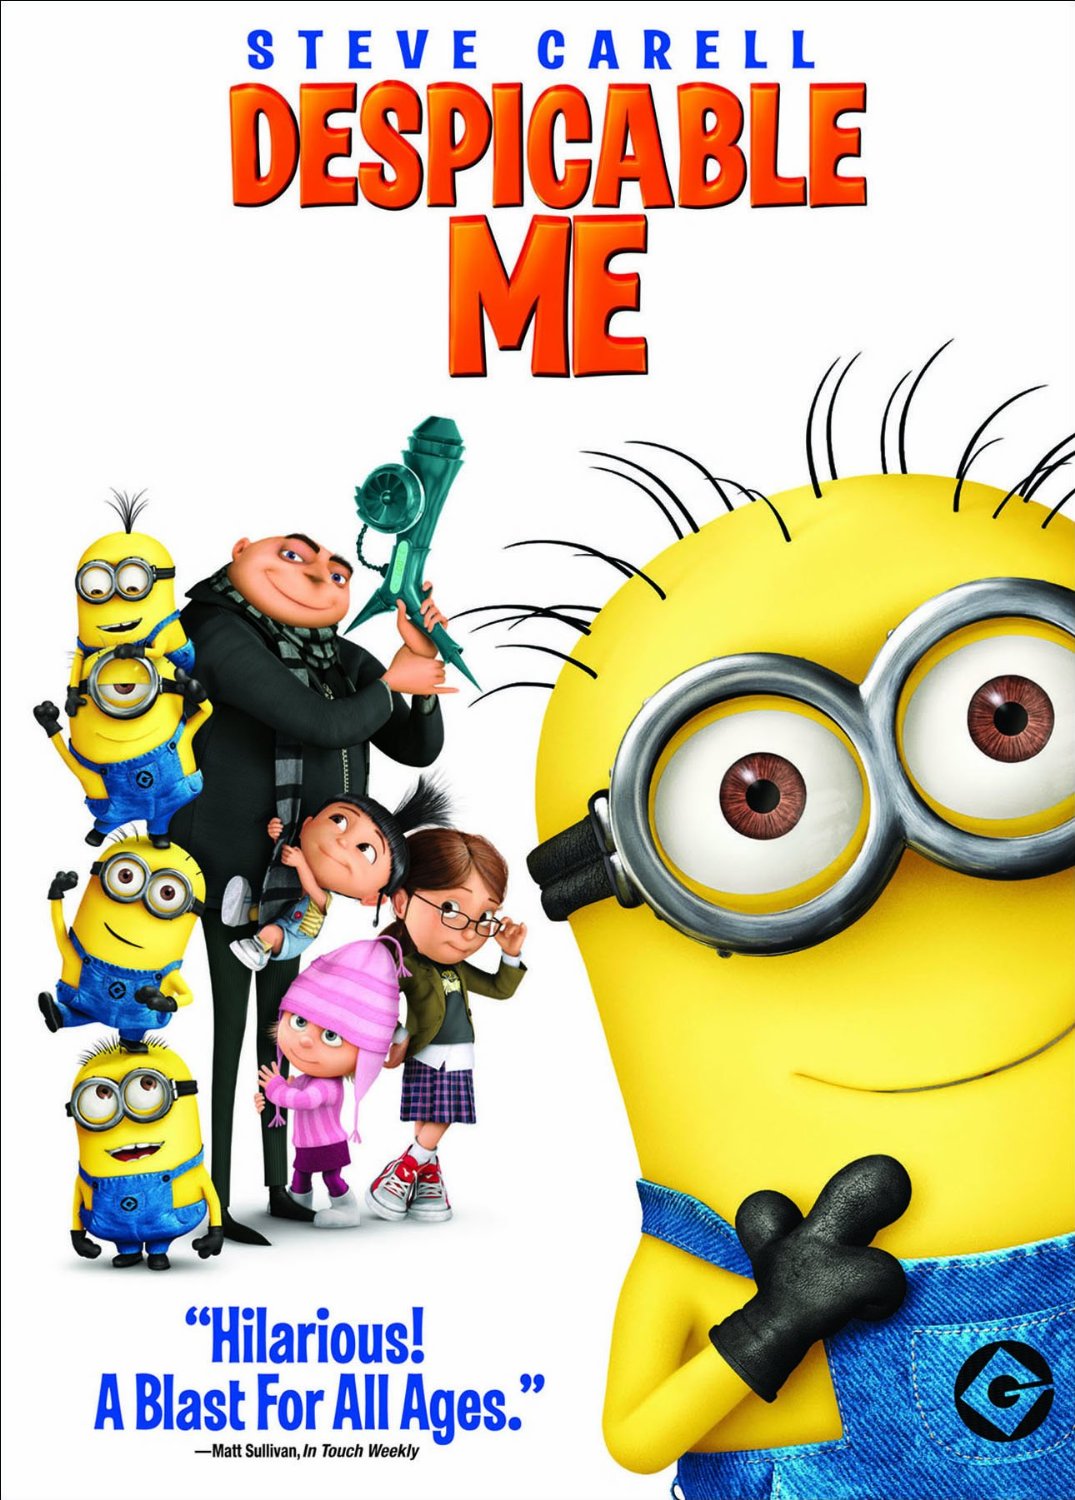 Despicable Me Only $9.99 on Amazon!